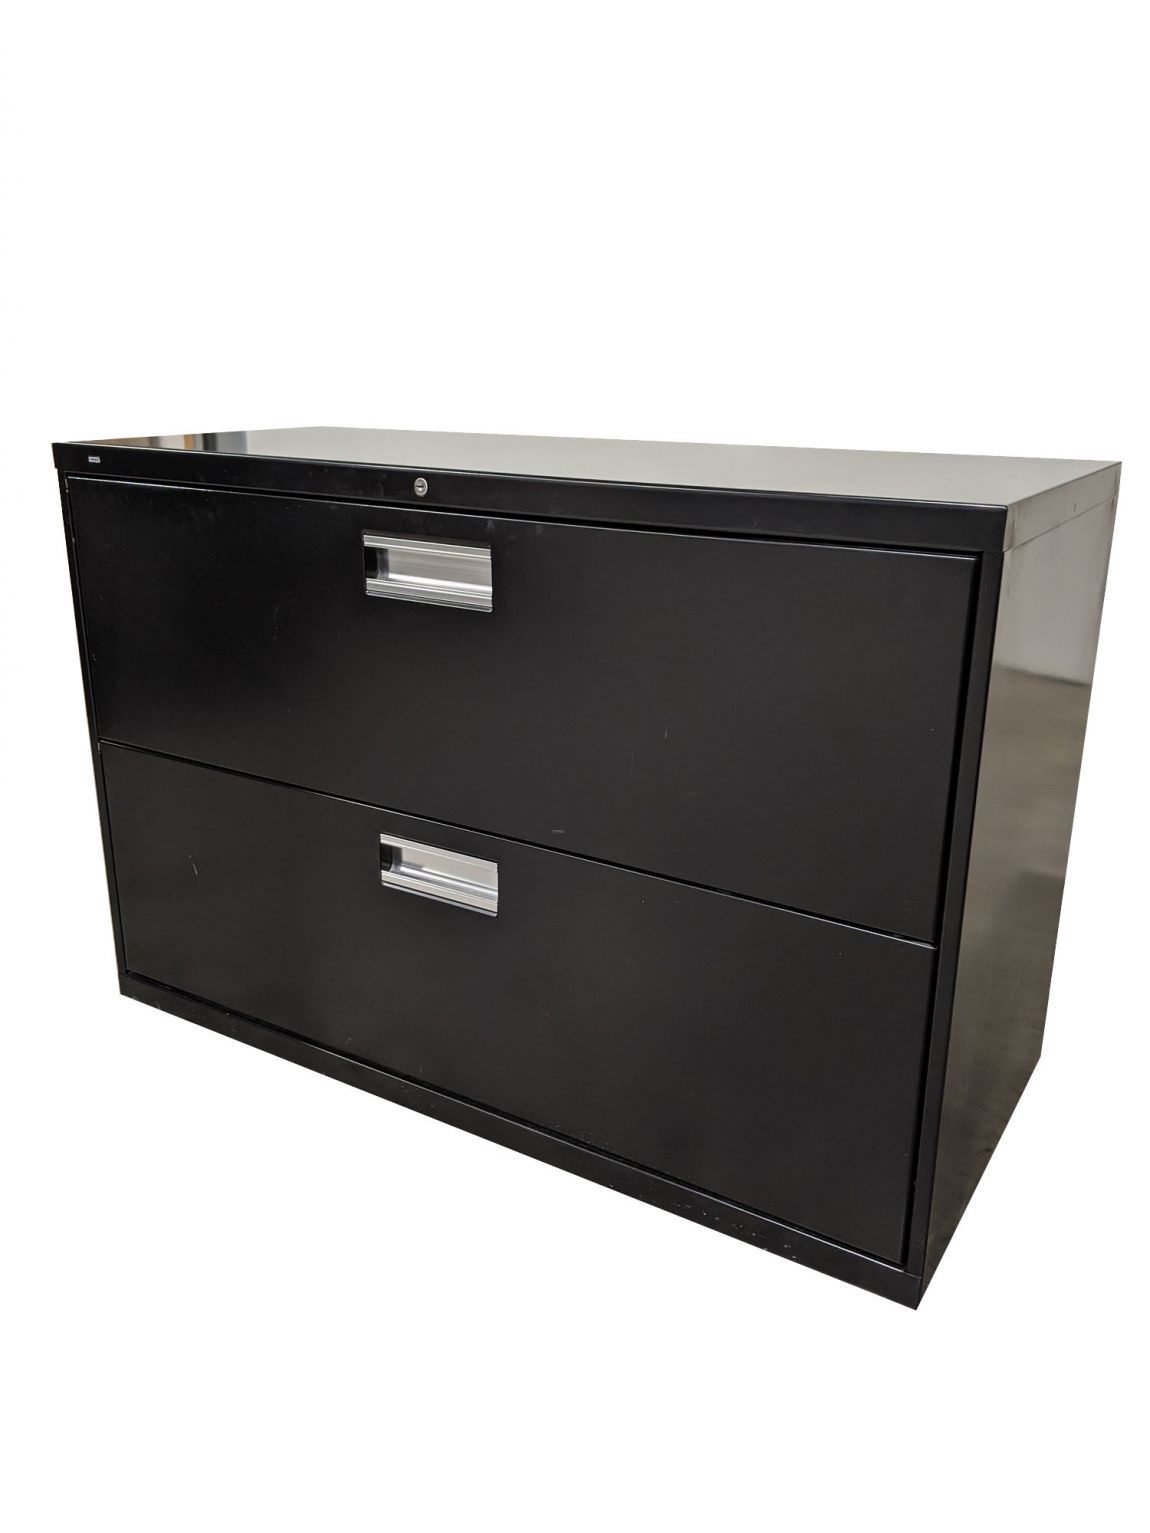 Black Black Hon 2 Drawer Lateral Filing Cabinet – 42 Inch Wide by Hon